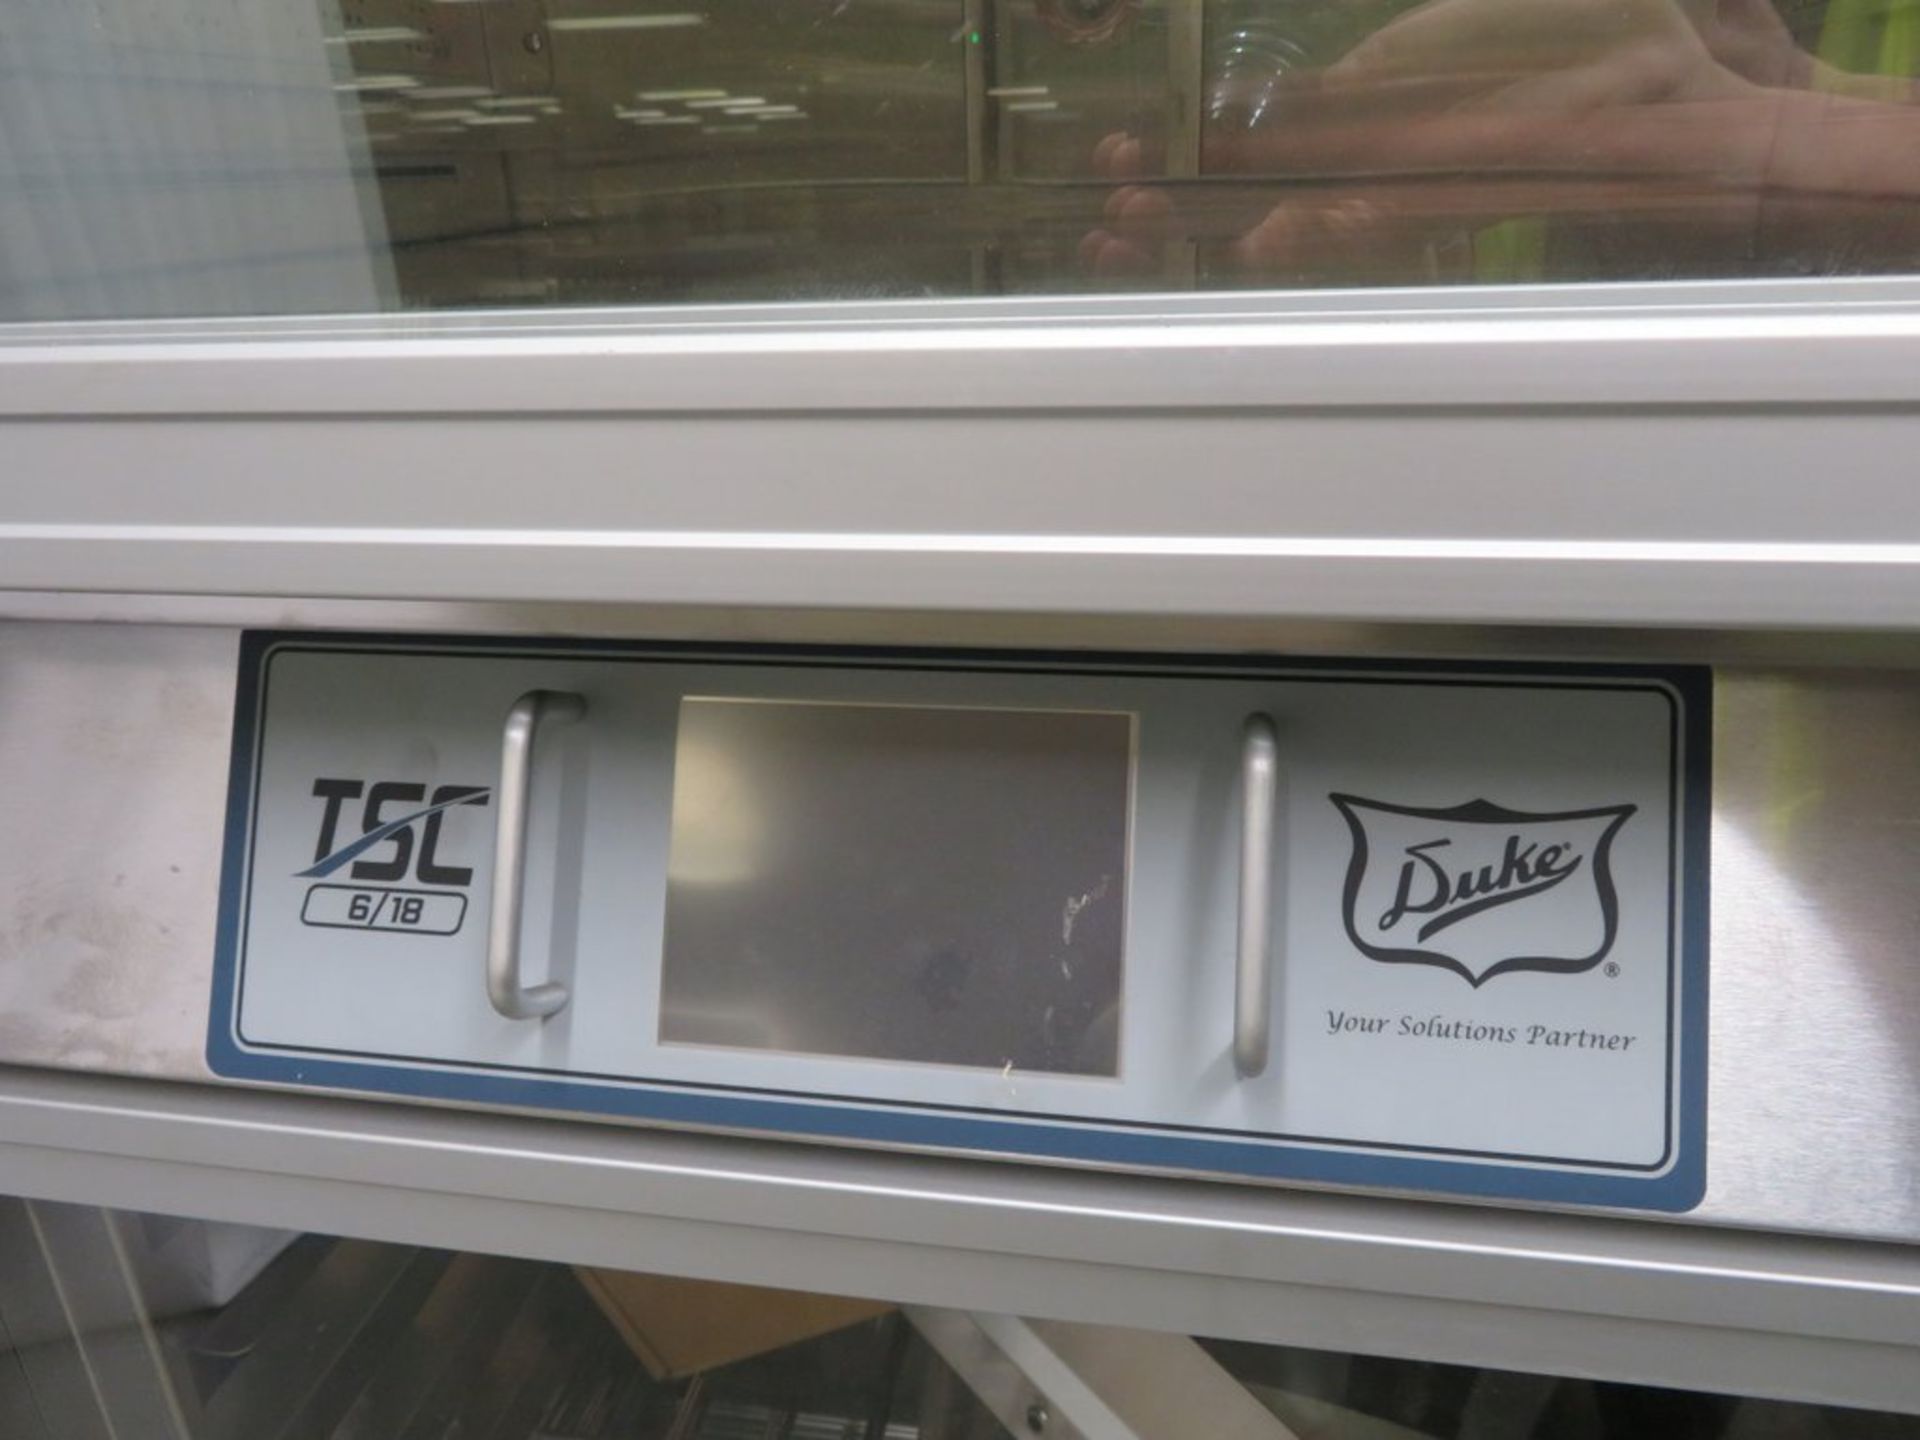 Duke TSC 6/18 proofer oven (touch screen control), 3 phase electric - Image 5 of 10